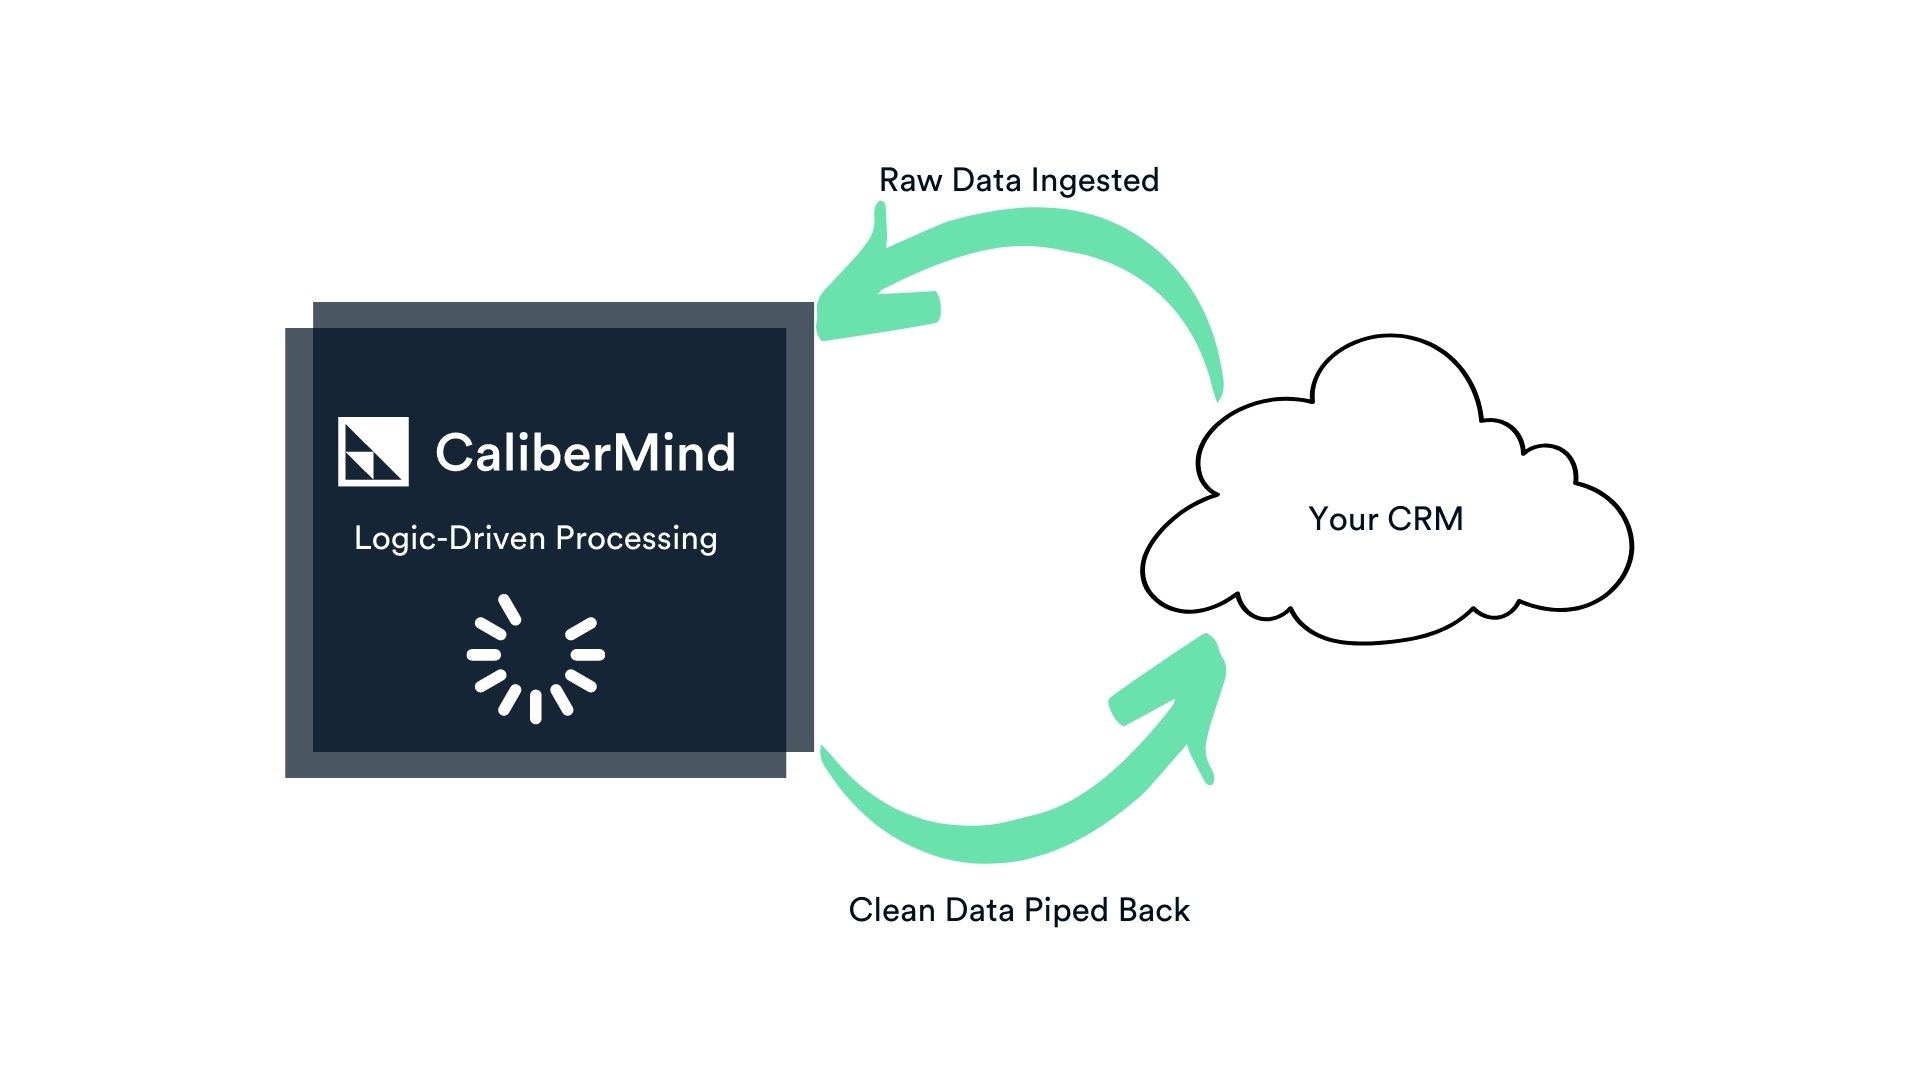 data flow from CaliberMind to the CRM